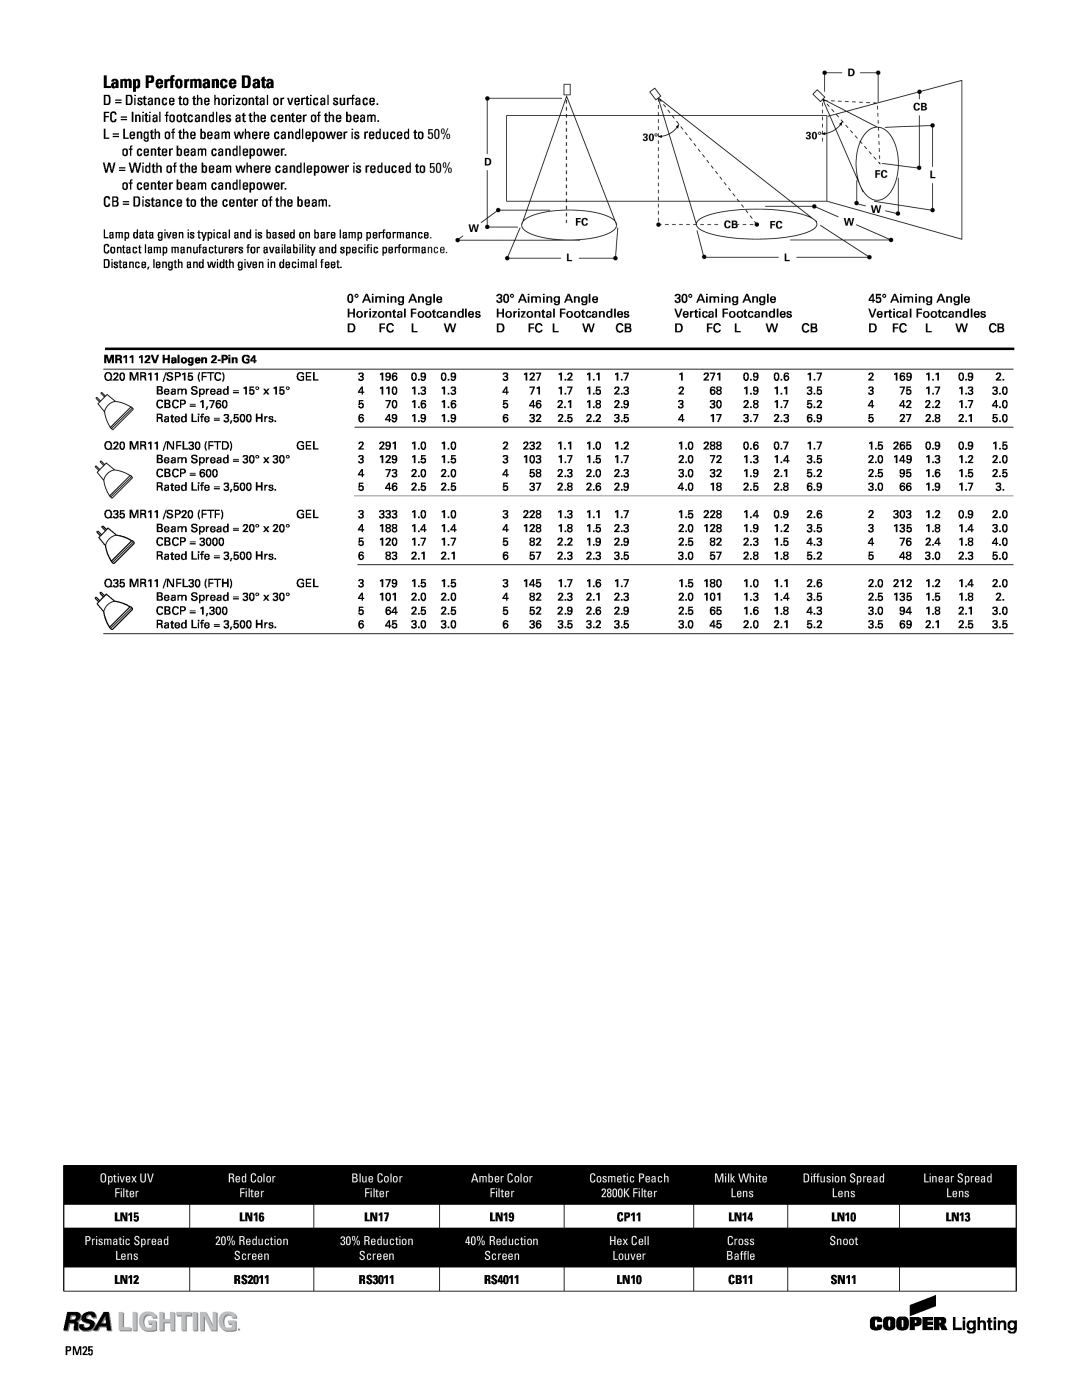 Cooper Lighting PM611cb specifications Lamp Performance Data 